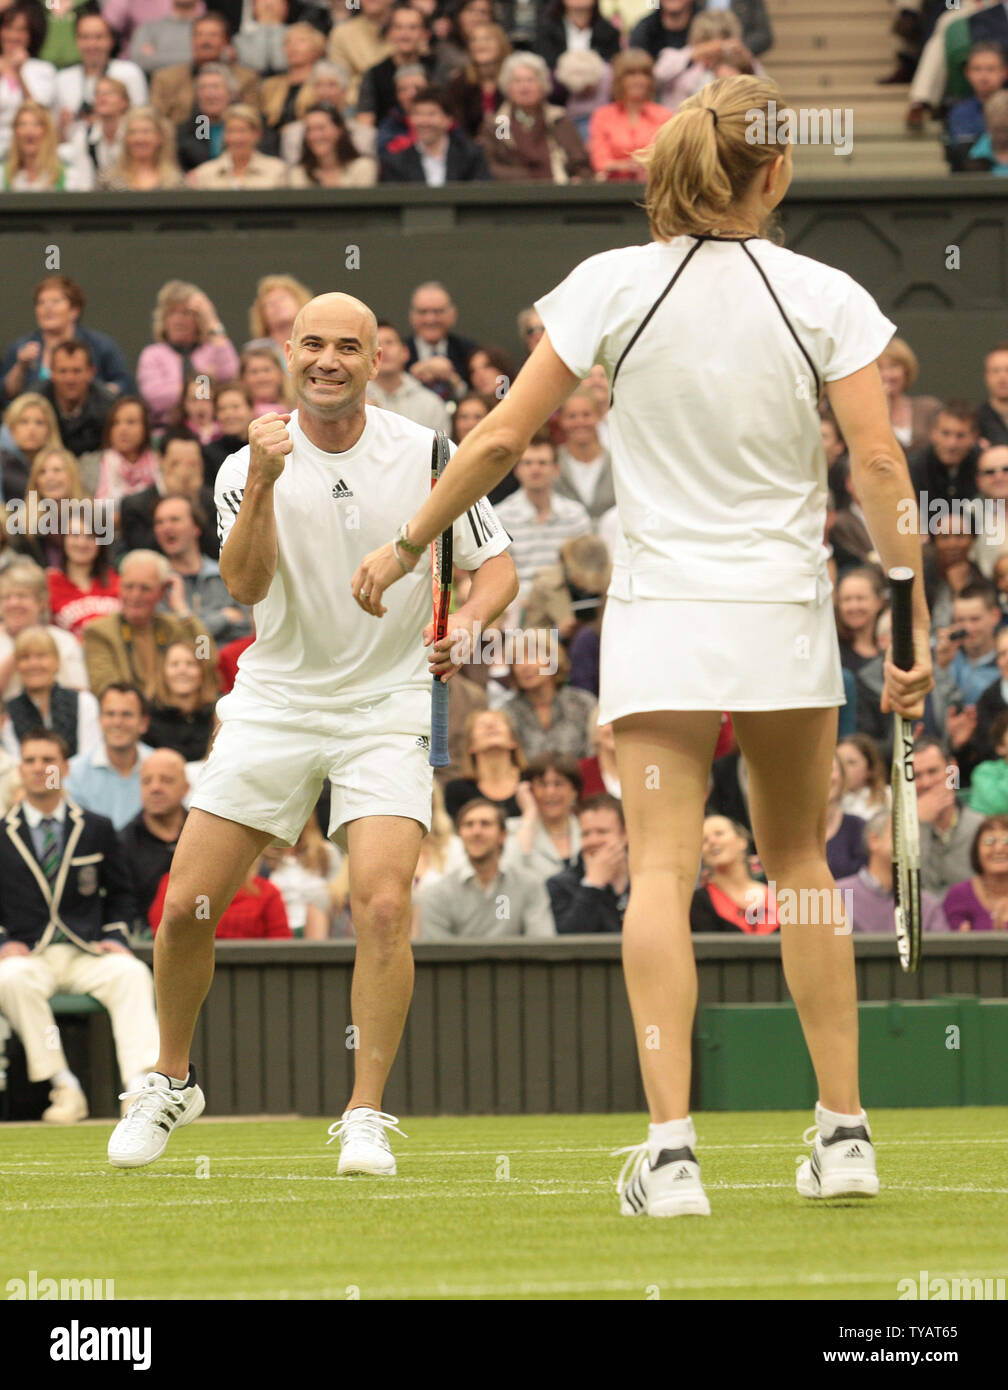 American tennis star Andre Agassi celebrates winning a point during a mixed doubles match with wife Steffi Graf against Britain Tim Henman and Kim Clijsters. The match was played to celebrate the first game on the new Wimbledon centre court with the roof fully closed on Sunday May 17 2009. (UPi Photo/Hugo Philpott) Stock Photo